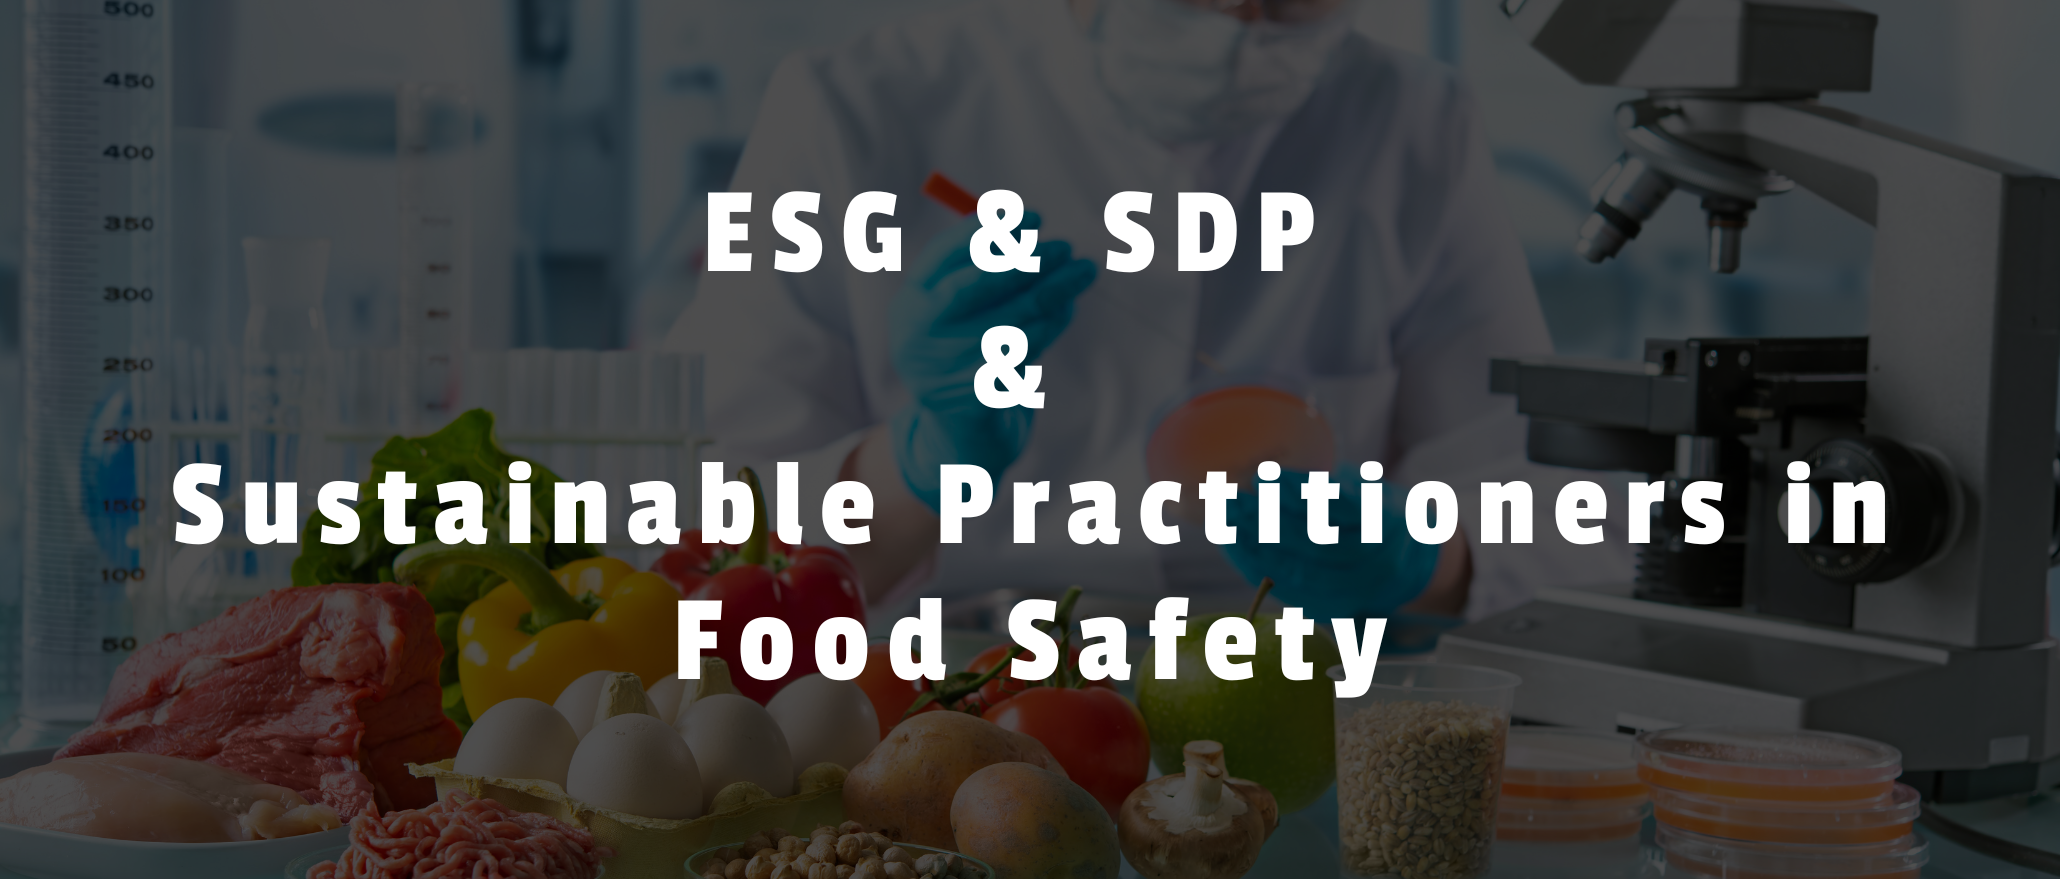 ESG & SDP & Sustainable Practitioners in Food Safety HACCP (Level 2)